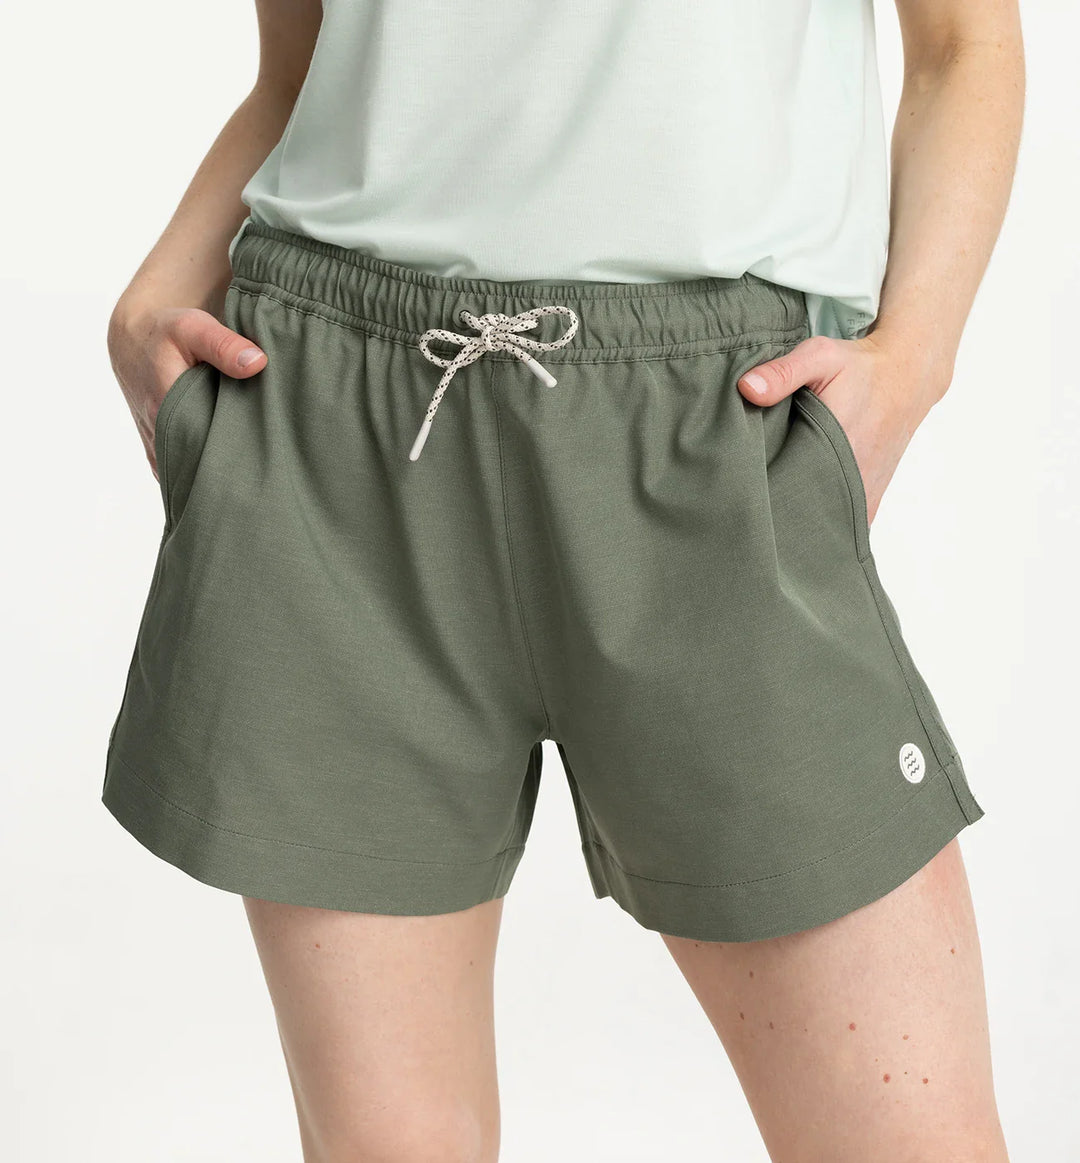 Free Fly Women's Reverb Short - AGAVE GREEN - Sun Diego Boardshop